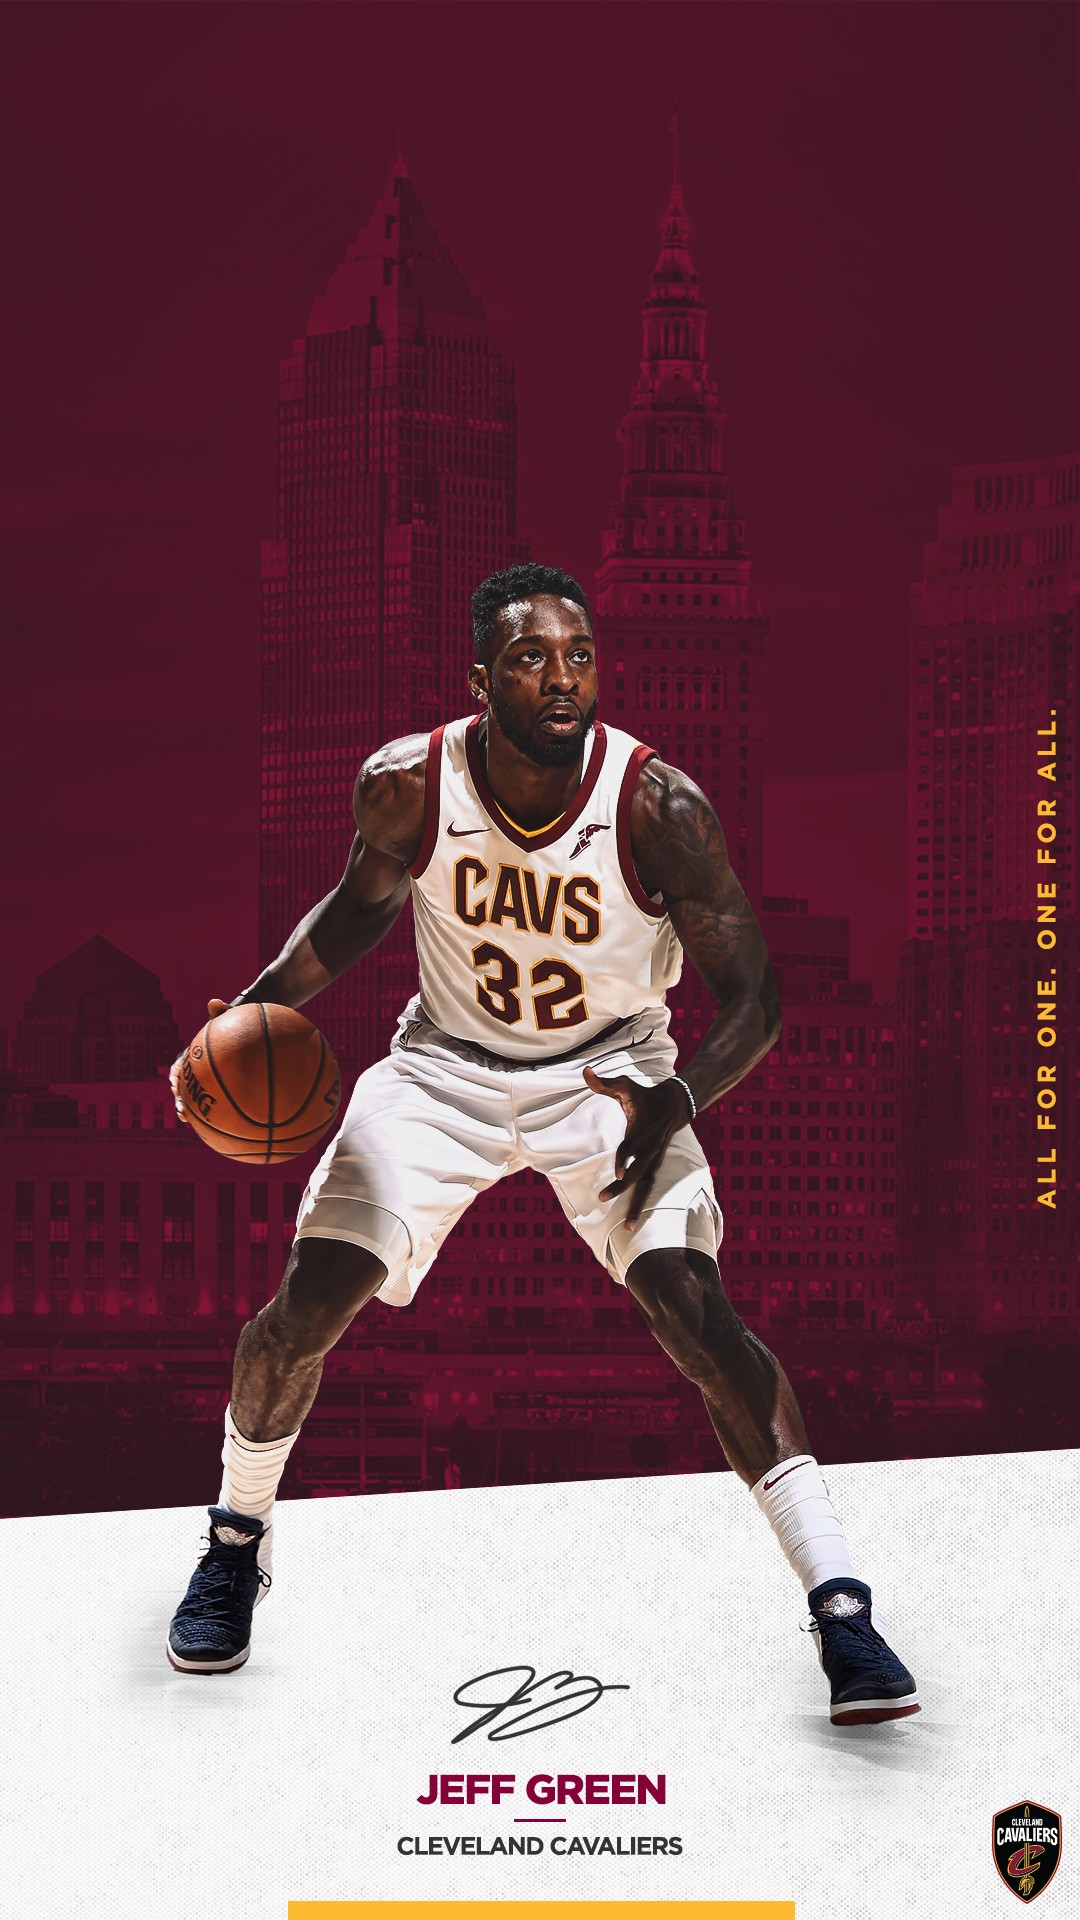 Jeff Green Mobile Wallpaper With Resolution 1080X1920